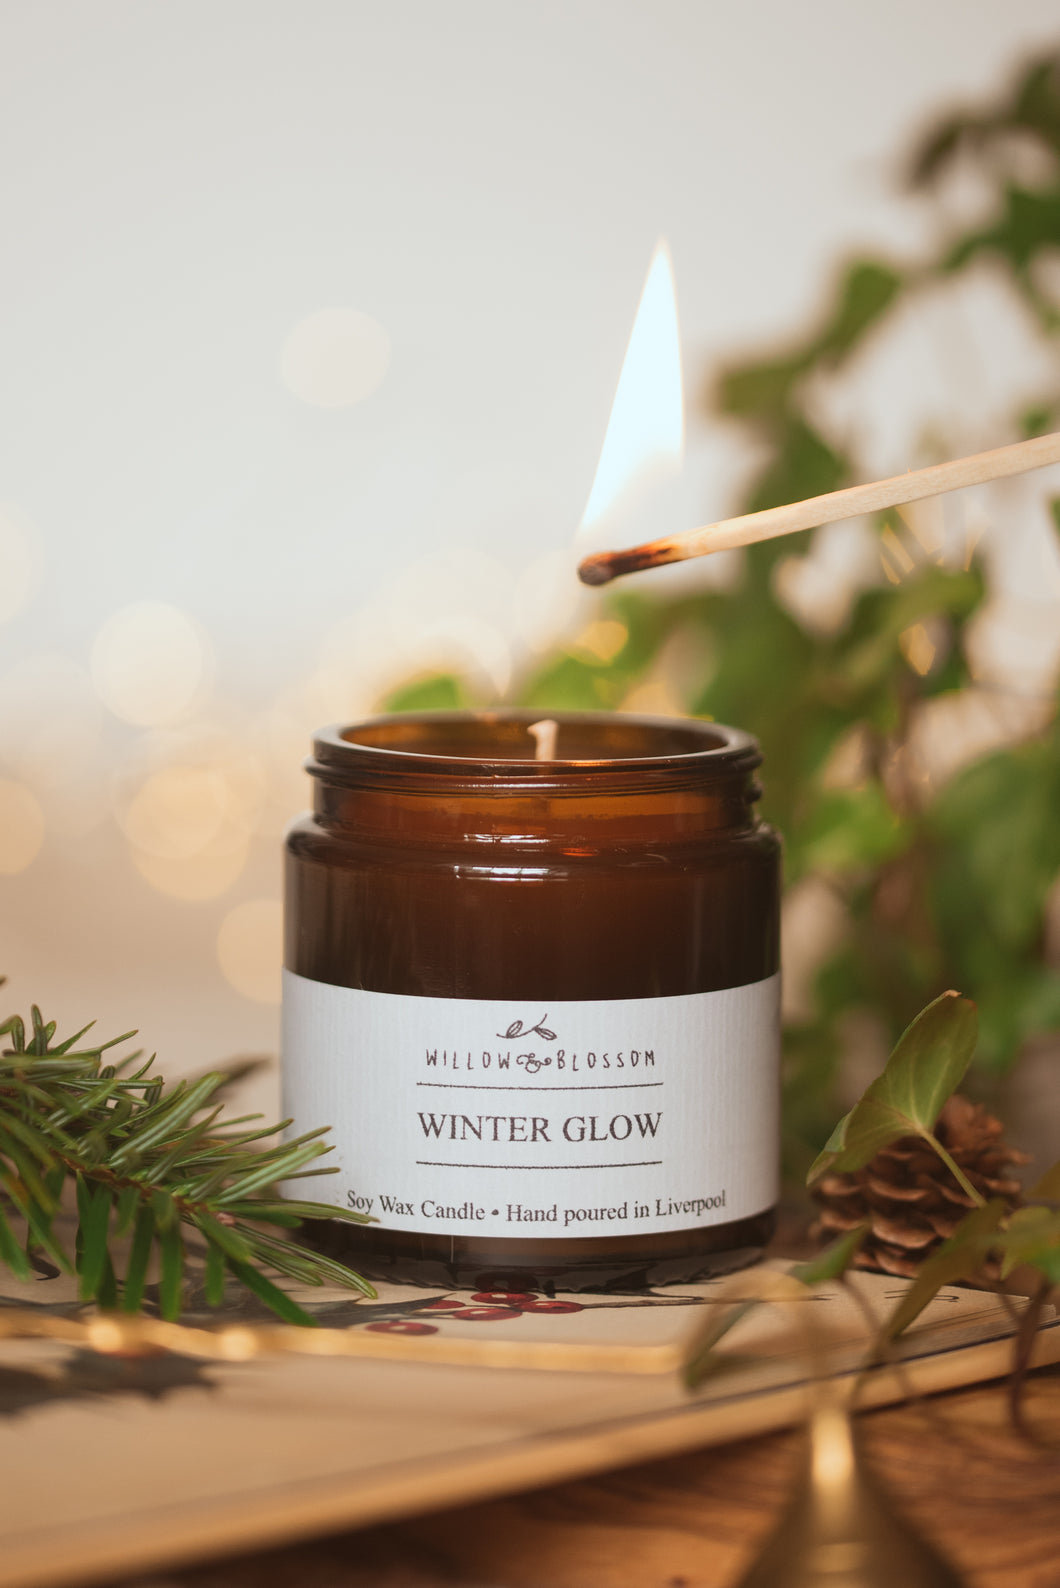 Winter Glow candle